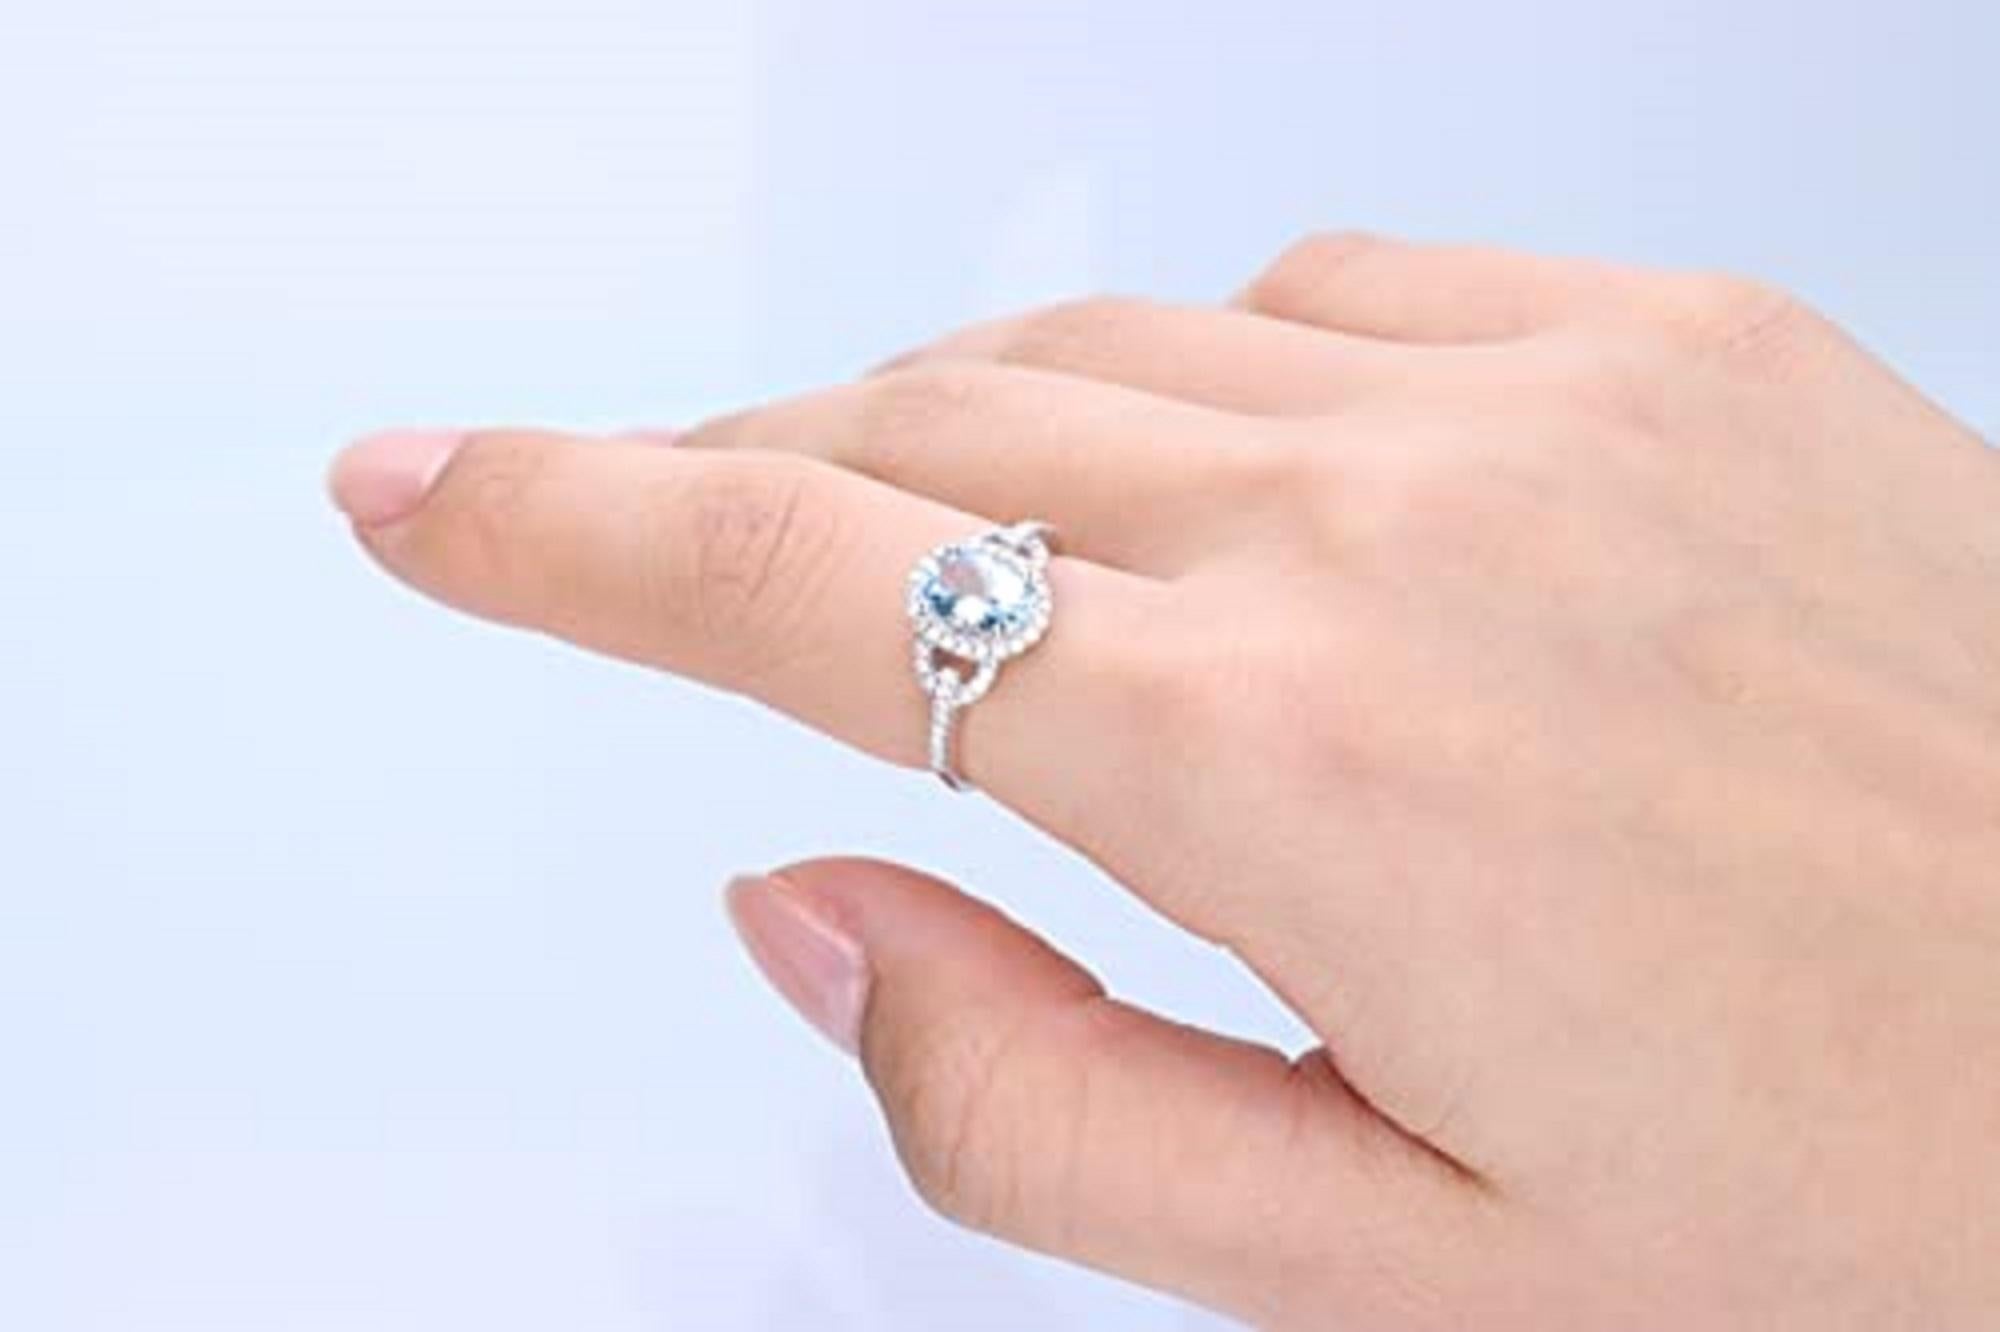 Decorate yourself in elegance with this Ring is crafted from 10-karat White Gold by Gin & Grace. This Ring is made up of 8x6 mm Oval-Cut Aquamarine (1 pcs) 1.12 carat and Round-cut White Diamond (50 Pcs) 0.25 Carat. This Ring is weight 2.36 grams.